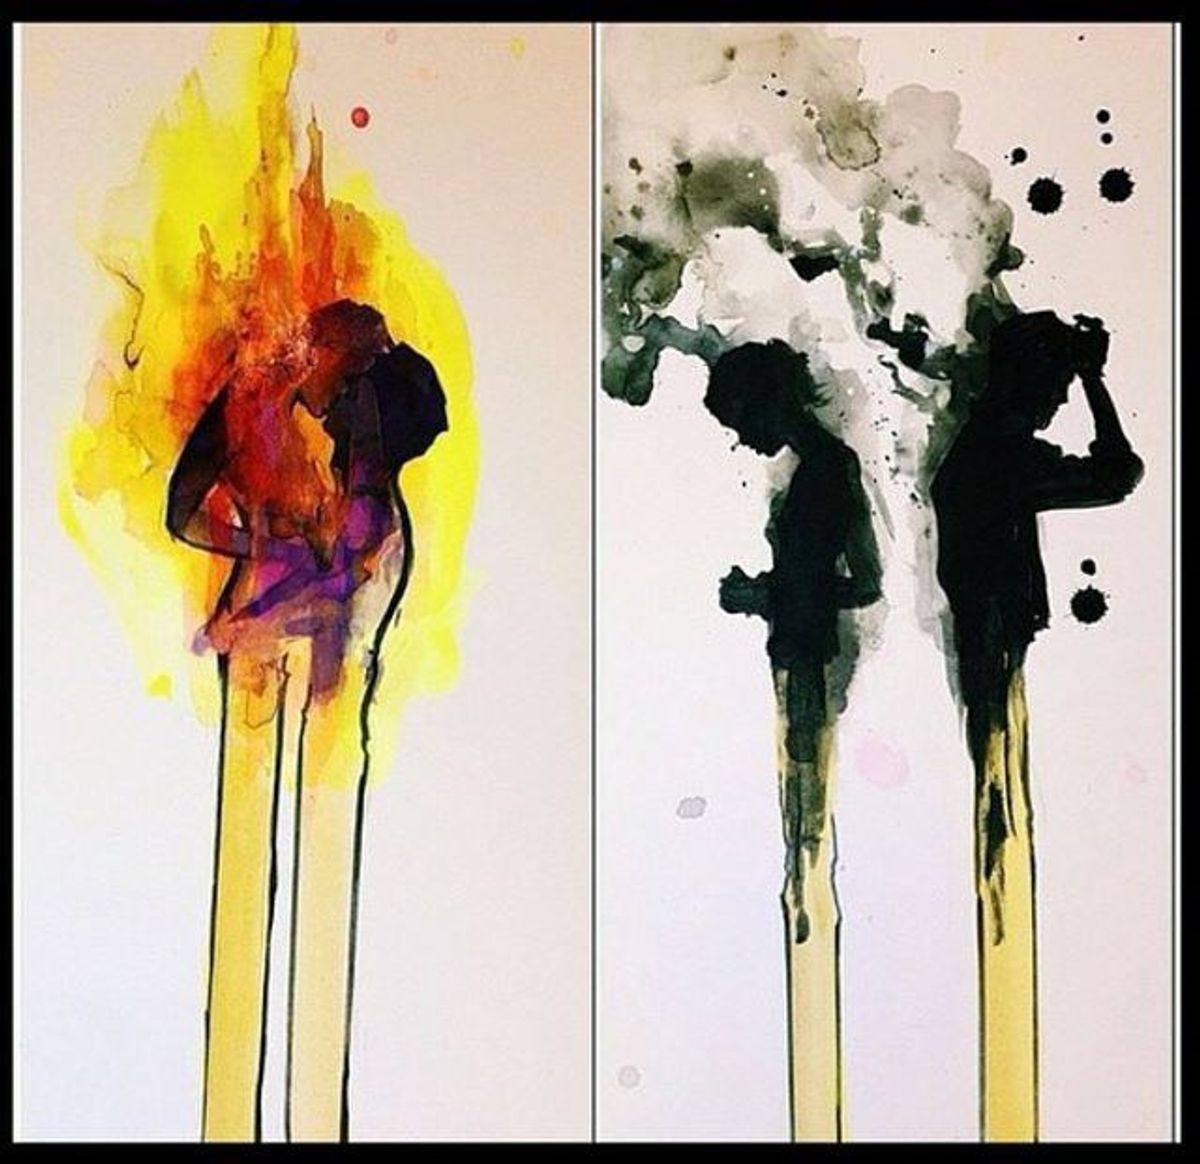 Why I'll Never Let a Relationship Burn Me Twice